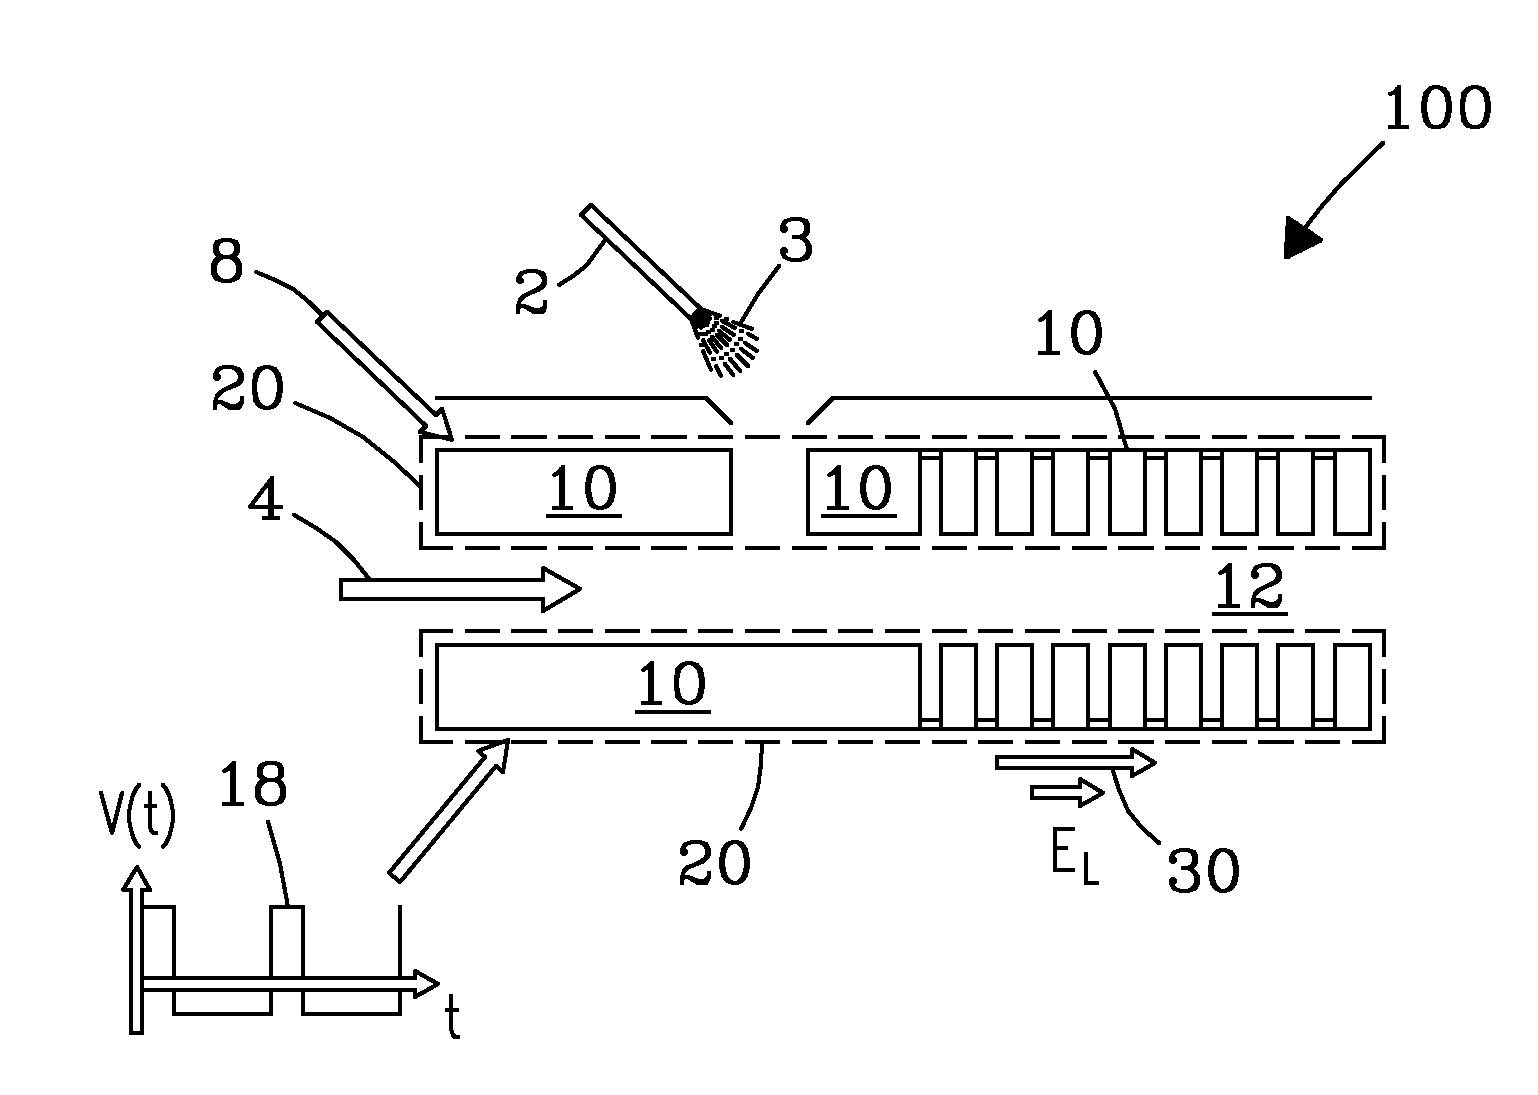 Platform for field asymmetric waveform ion mobility spectrometry with ion propulsion modes employing gas flow and electric field